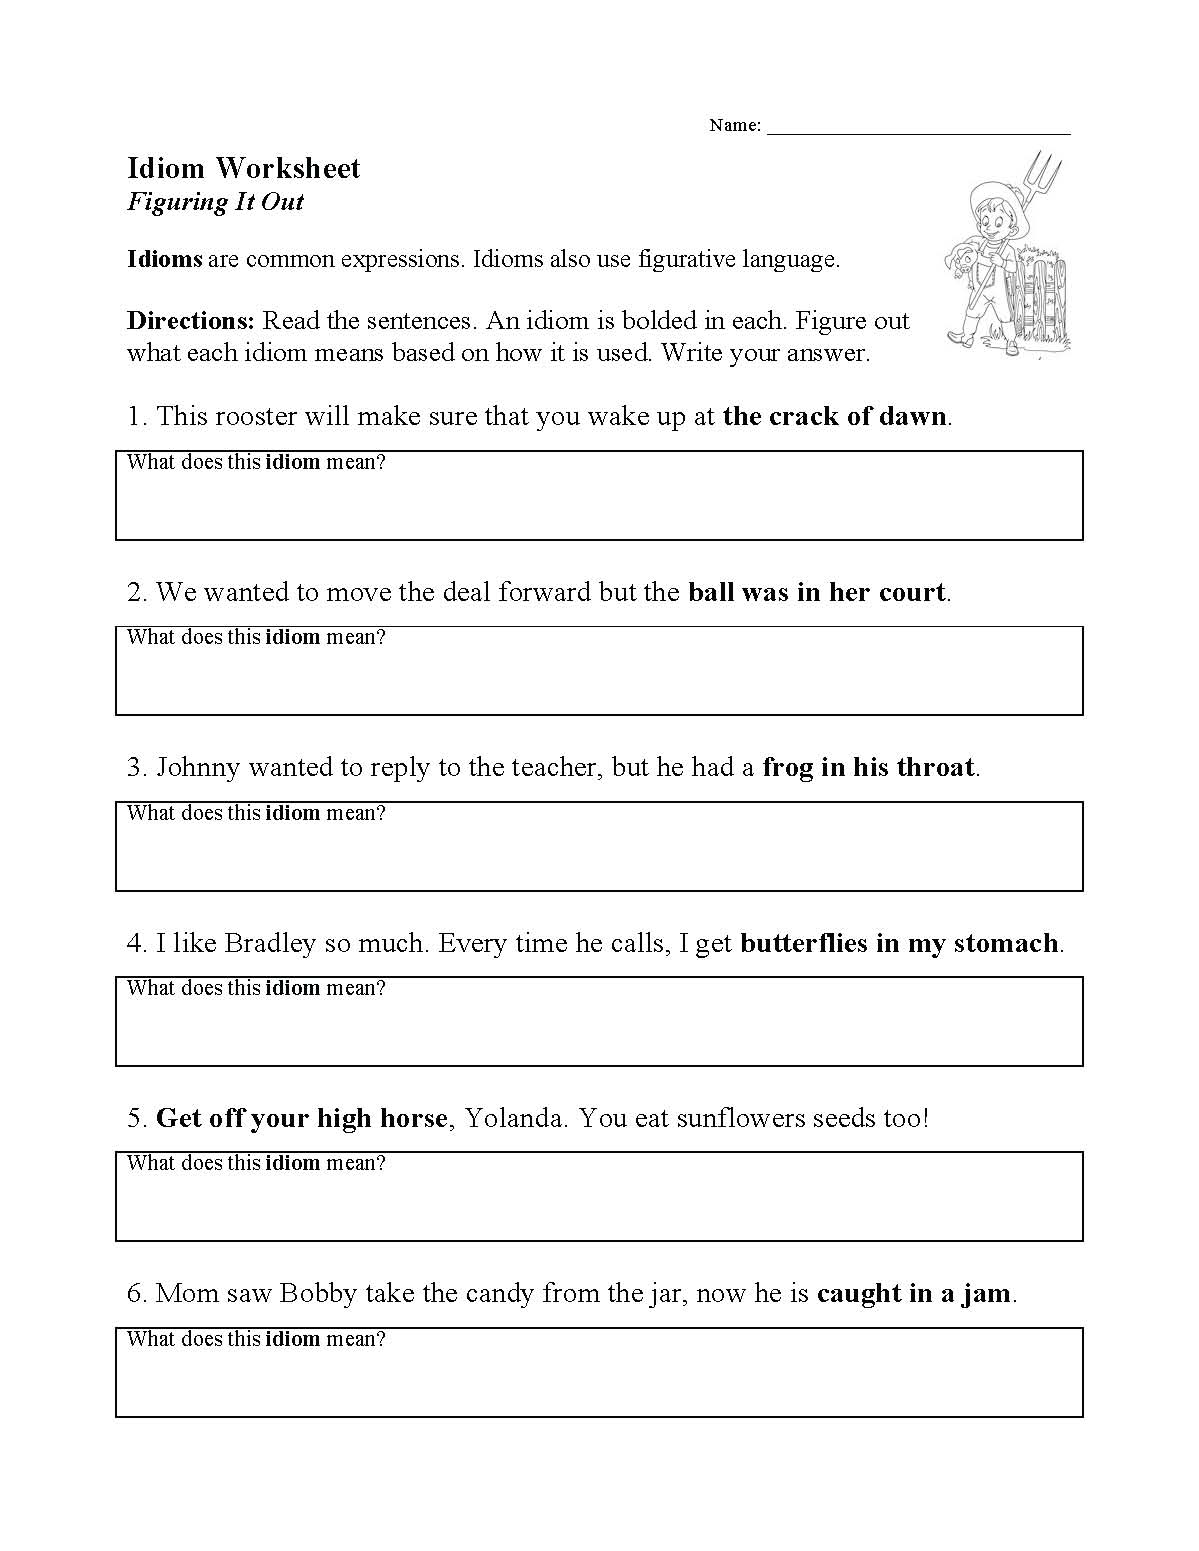 This is a preview image of our Idiom Worksheet. Click on it to enlarge or view the source file.